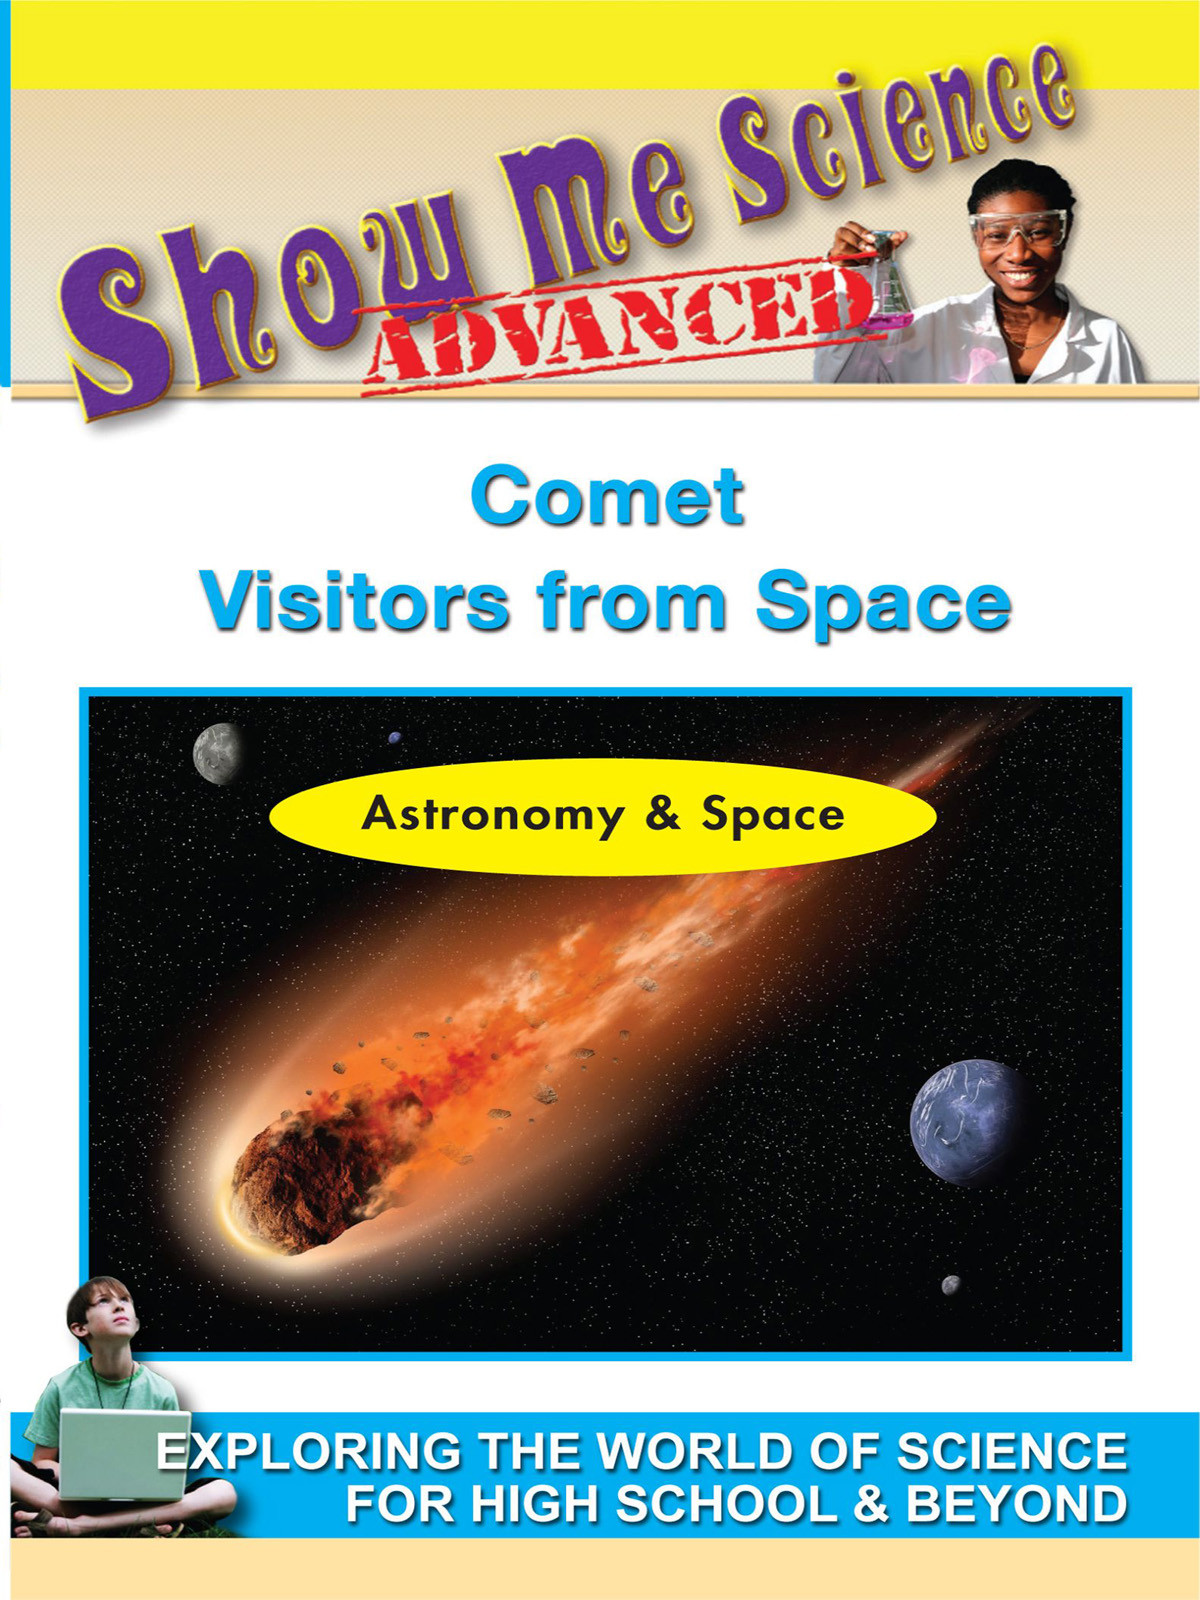 K4624 - Astronomy & Space Comet  Visitors from Space